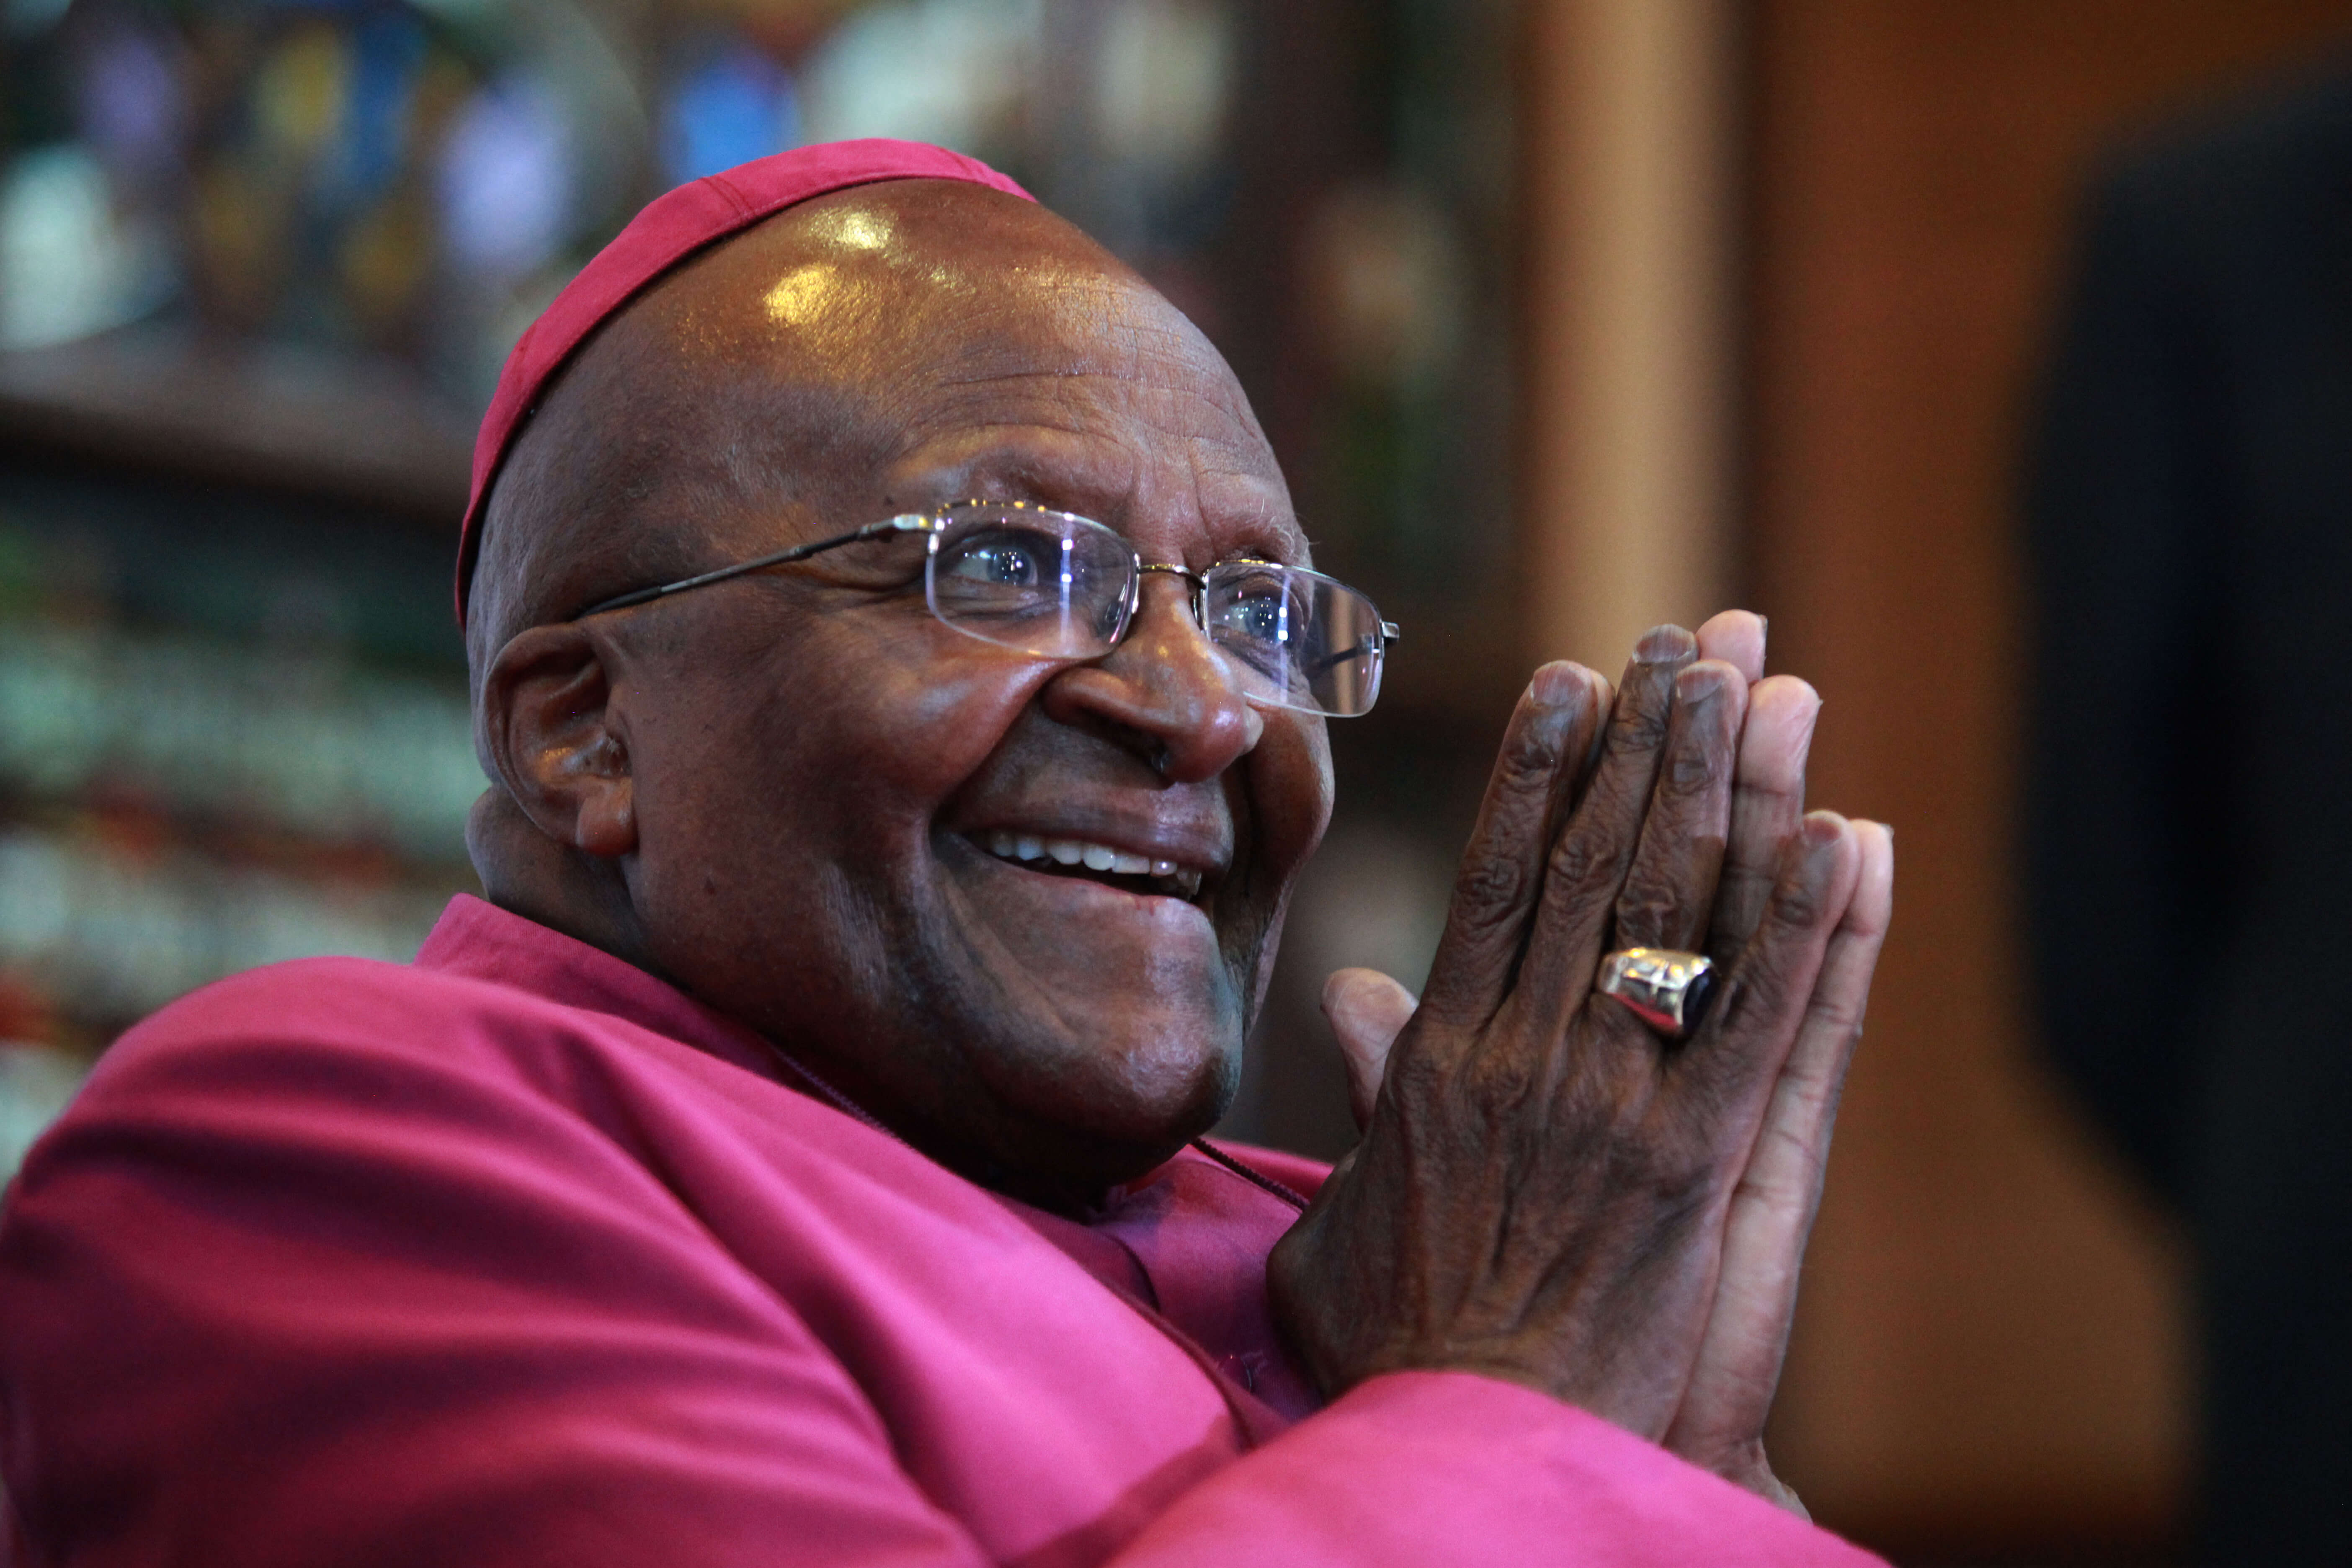 ‘Study opened up a whole new world to me’: Archbishop Desmond Tutu on his years at King’s College London